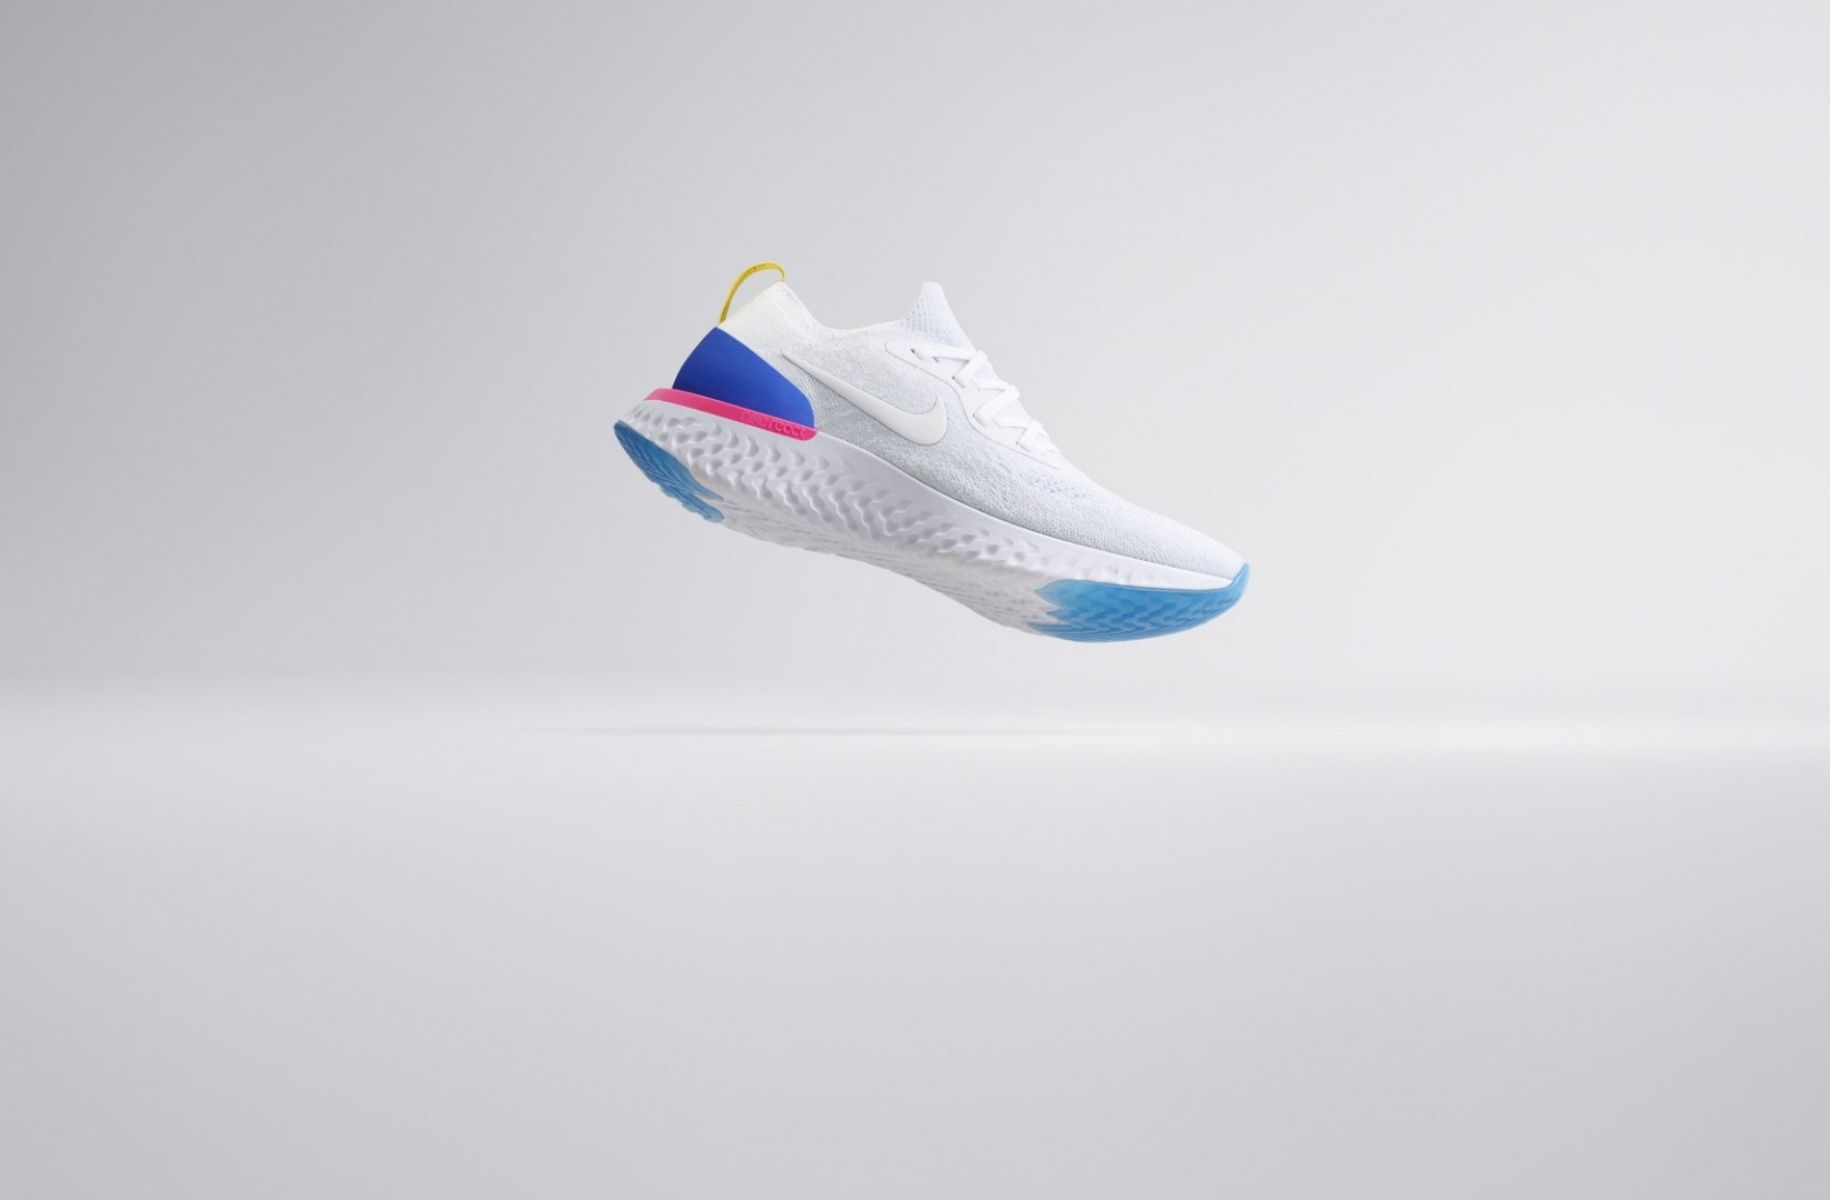 Nike React sneaker in white colorway against white background